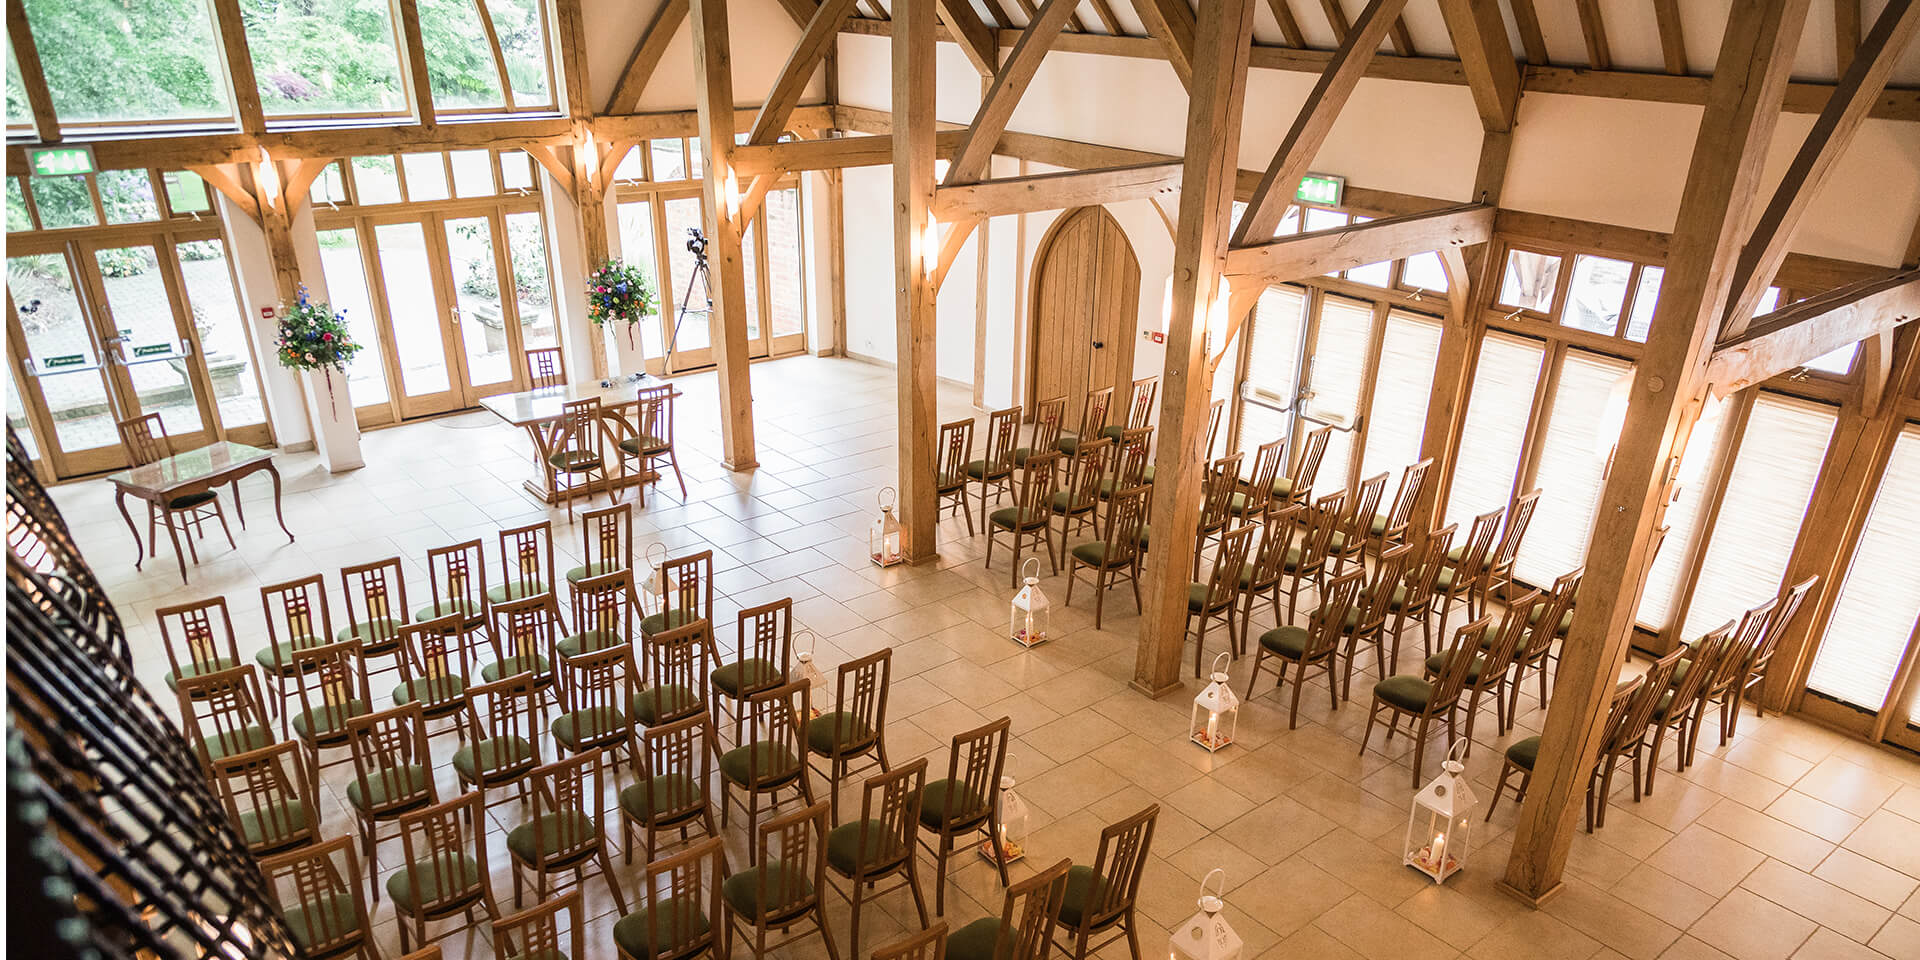 A full view of this Hampshire venues Ceremony Barn